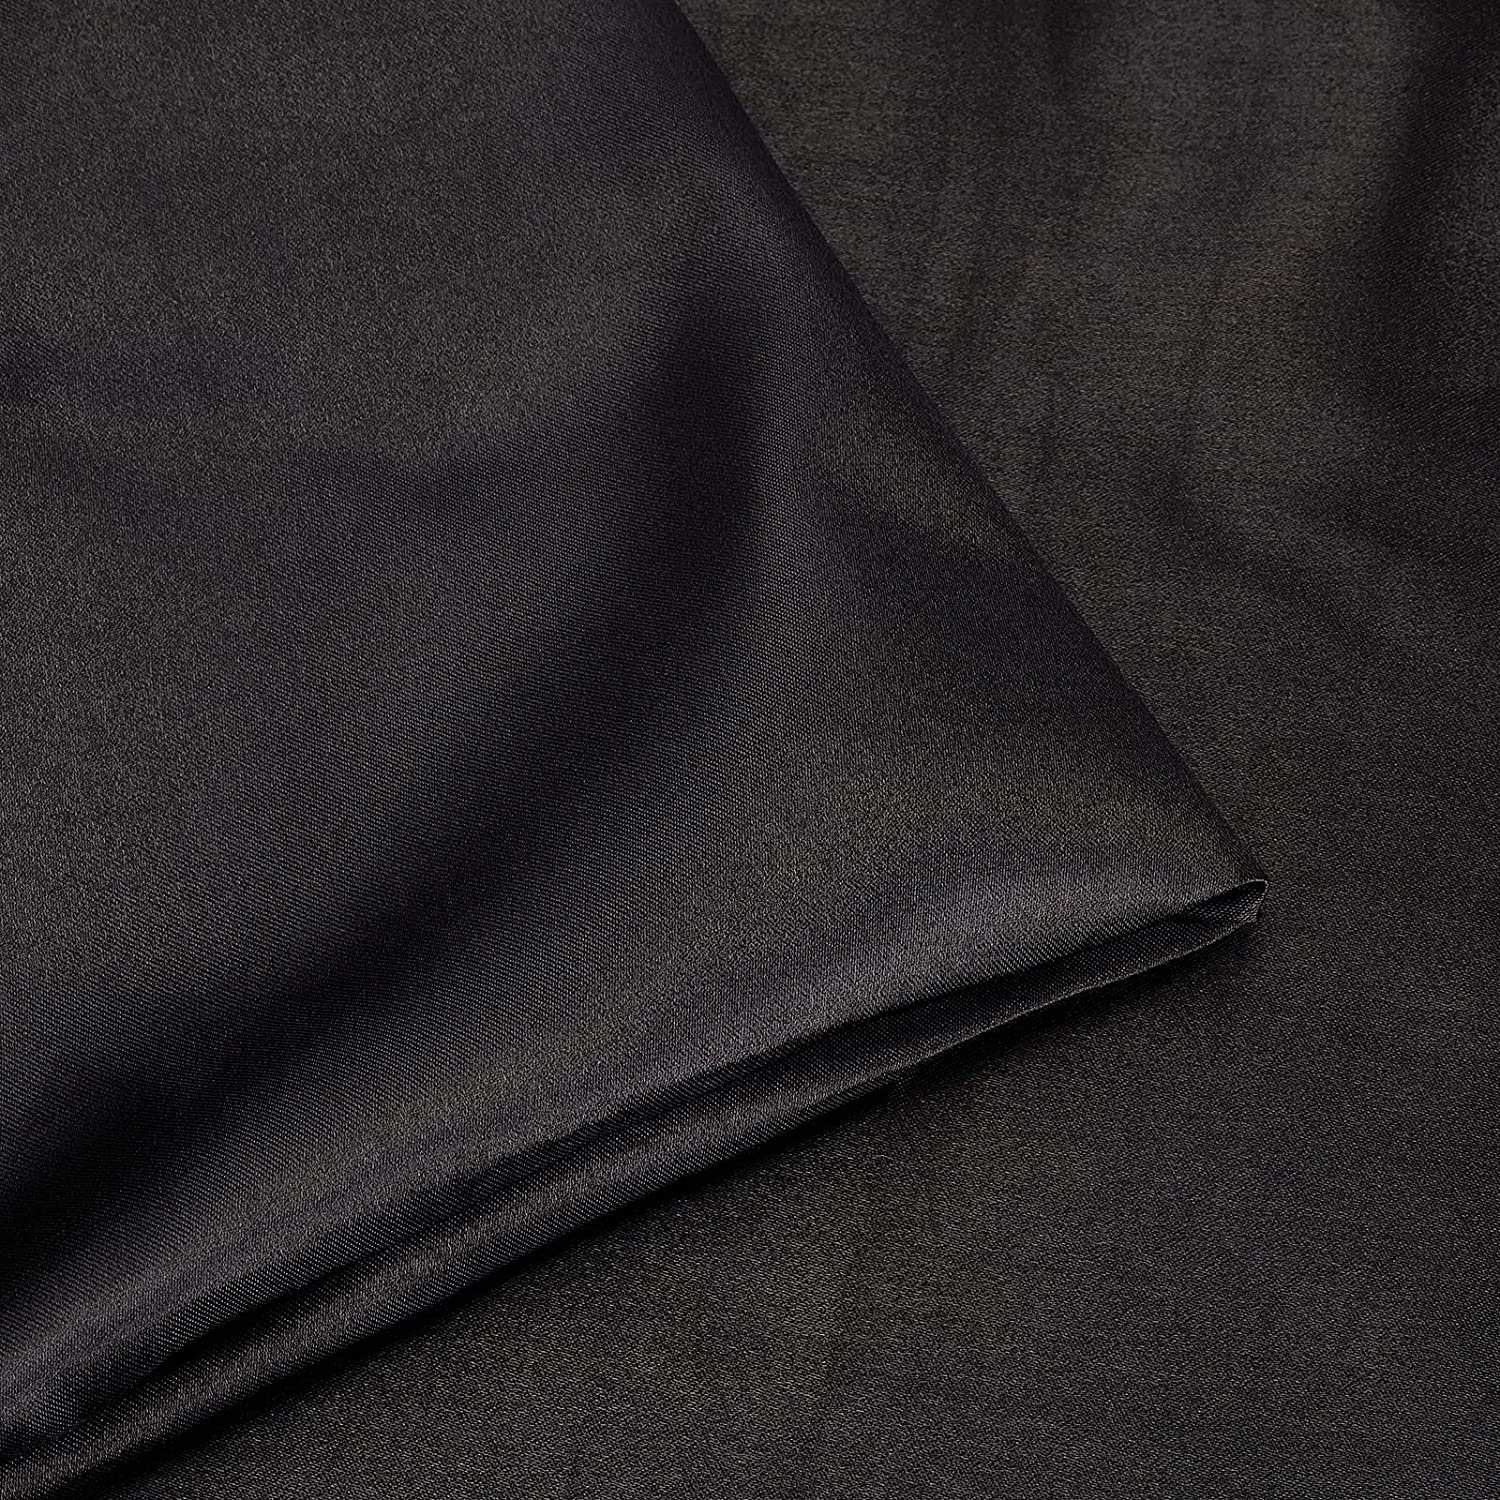 5yards Silky Shiny Satin, 60inch Wide Black Satin Fabric, Poly Silk Silky Satin Fabric for Arts and Crafts, DIY, Sewing Decoration